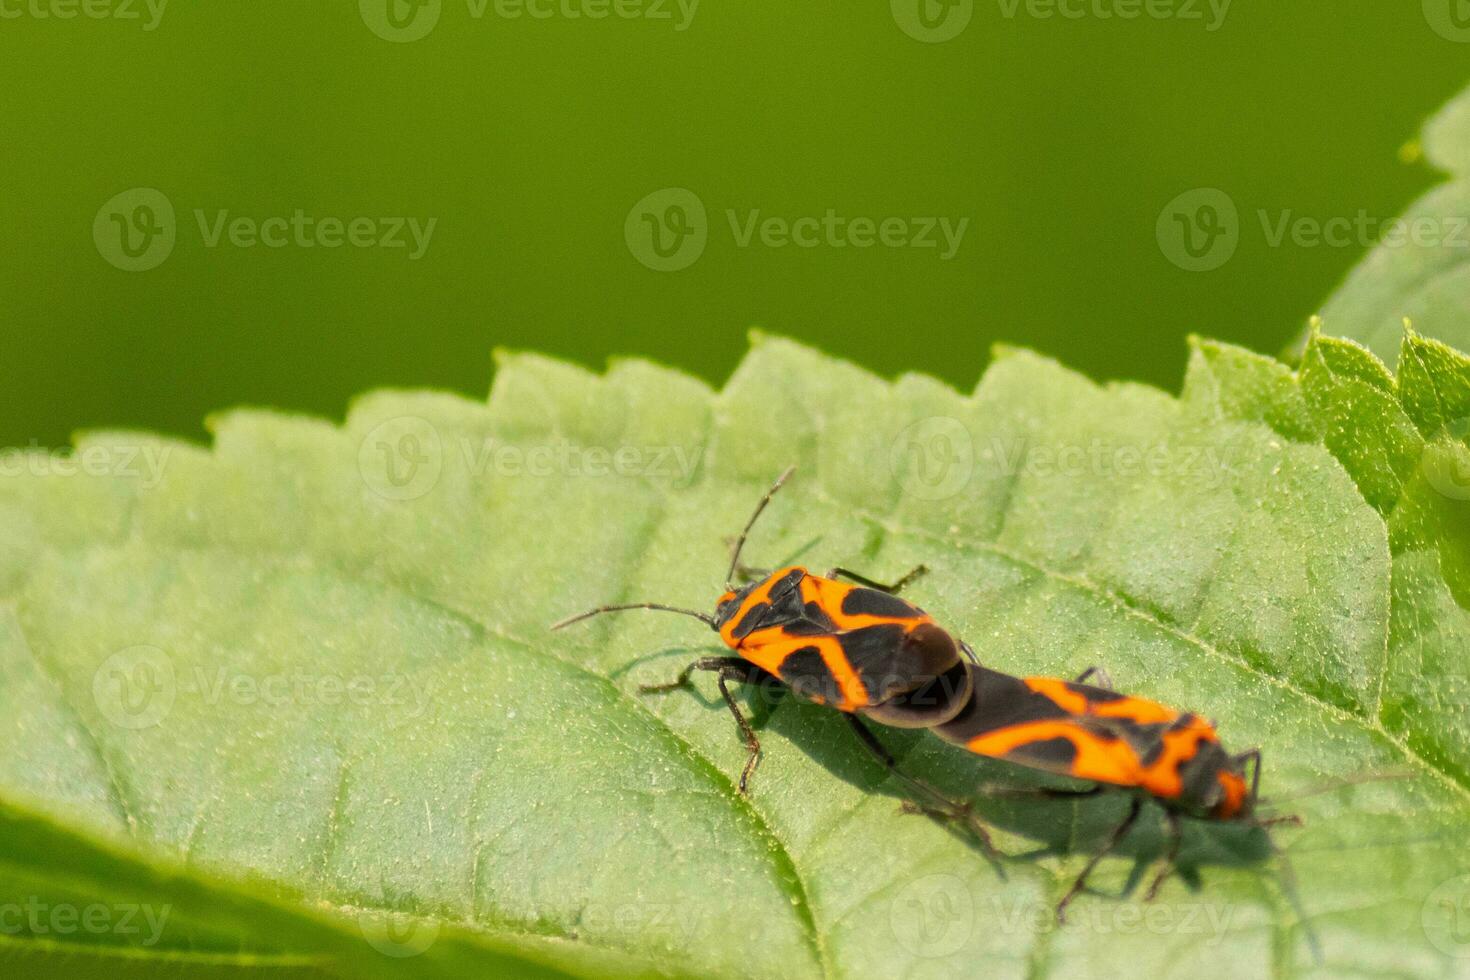 These insects are called false milkweed bugs. They are a type of seed bugs. The red and black color on the exoskeleton really stands out against the leaf. These seem to be engaged in a mating ritual. photo